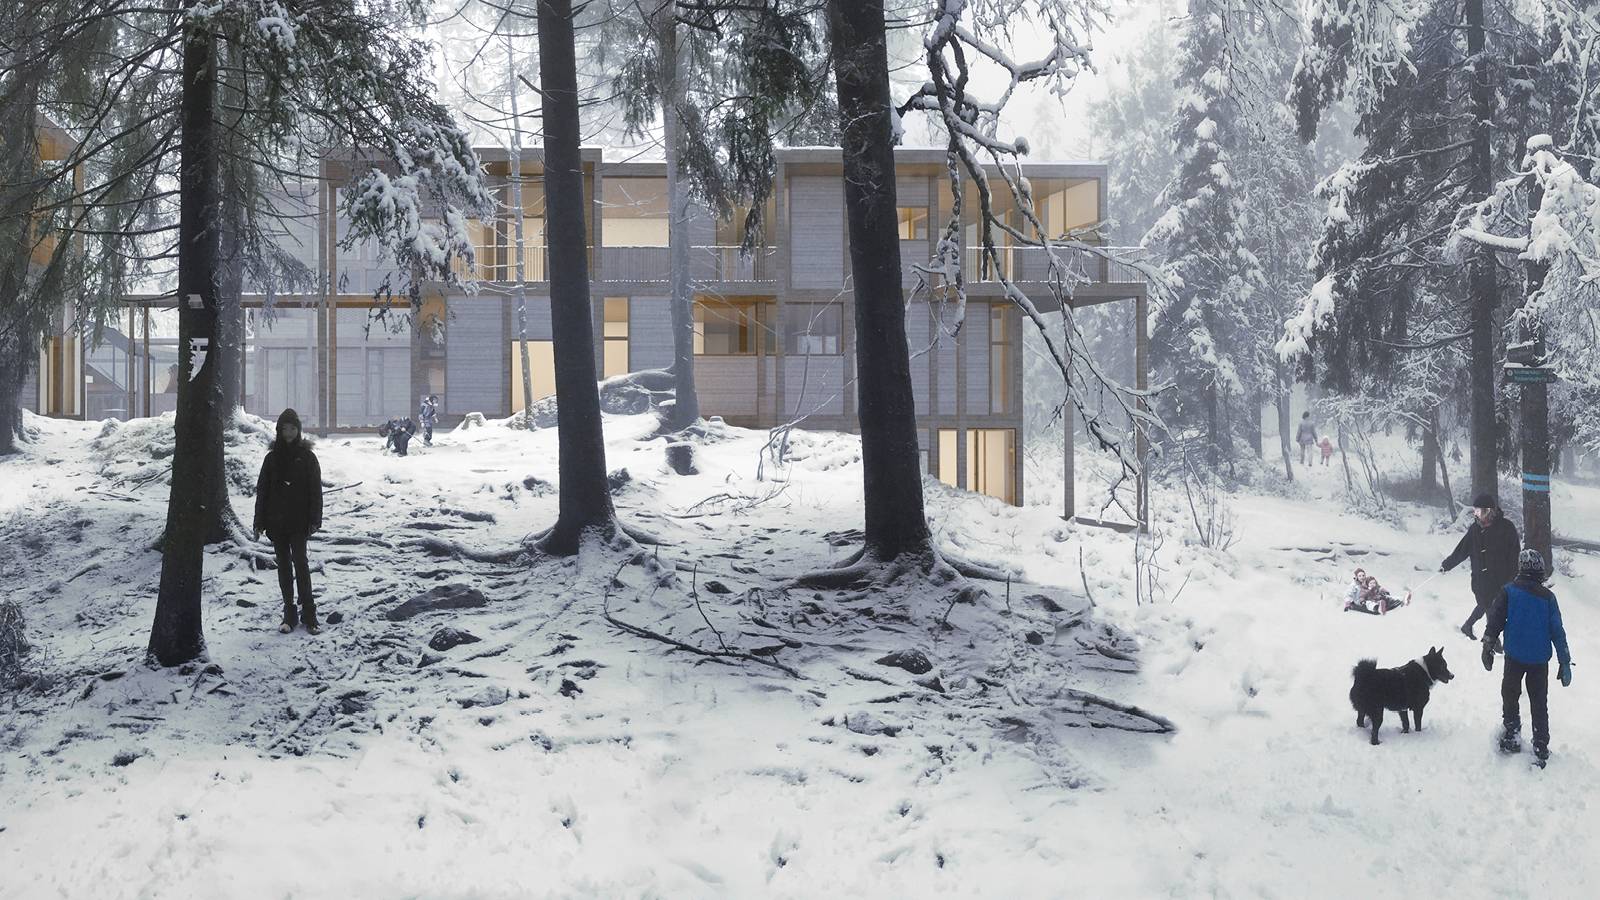 THE PRIMARY SCHOOL INTEGRATED IN THE FOREST - Tangen Centre - SPOL Architects